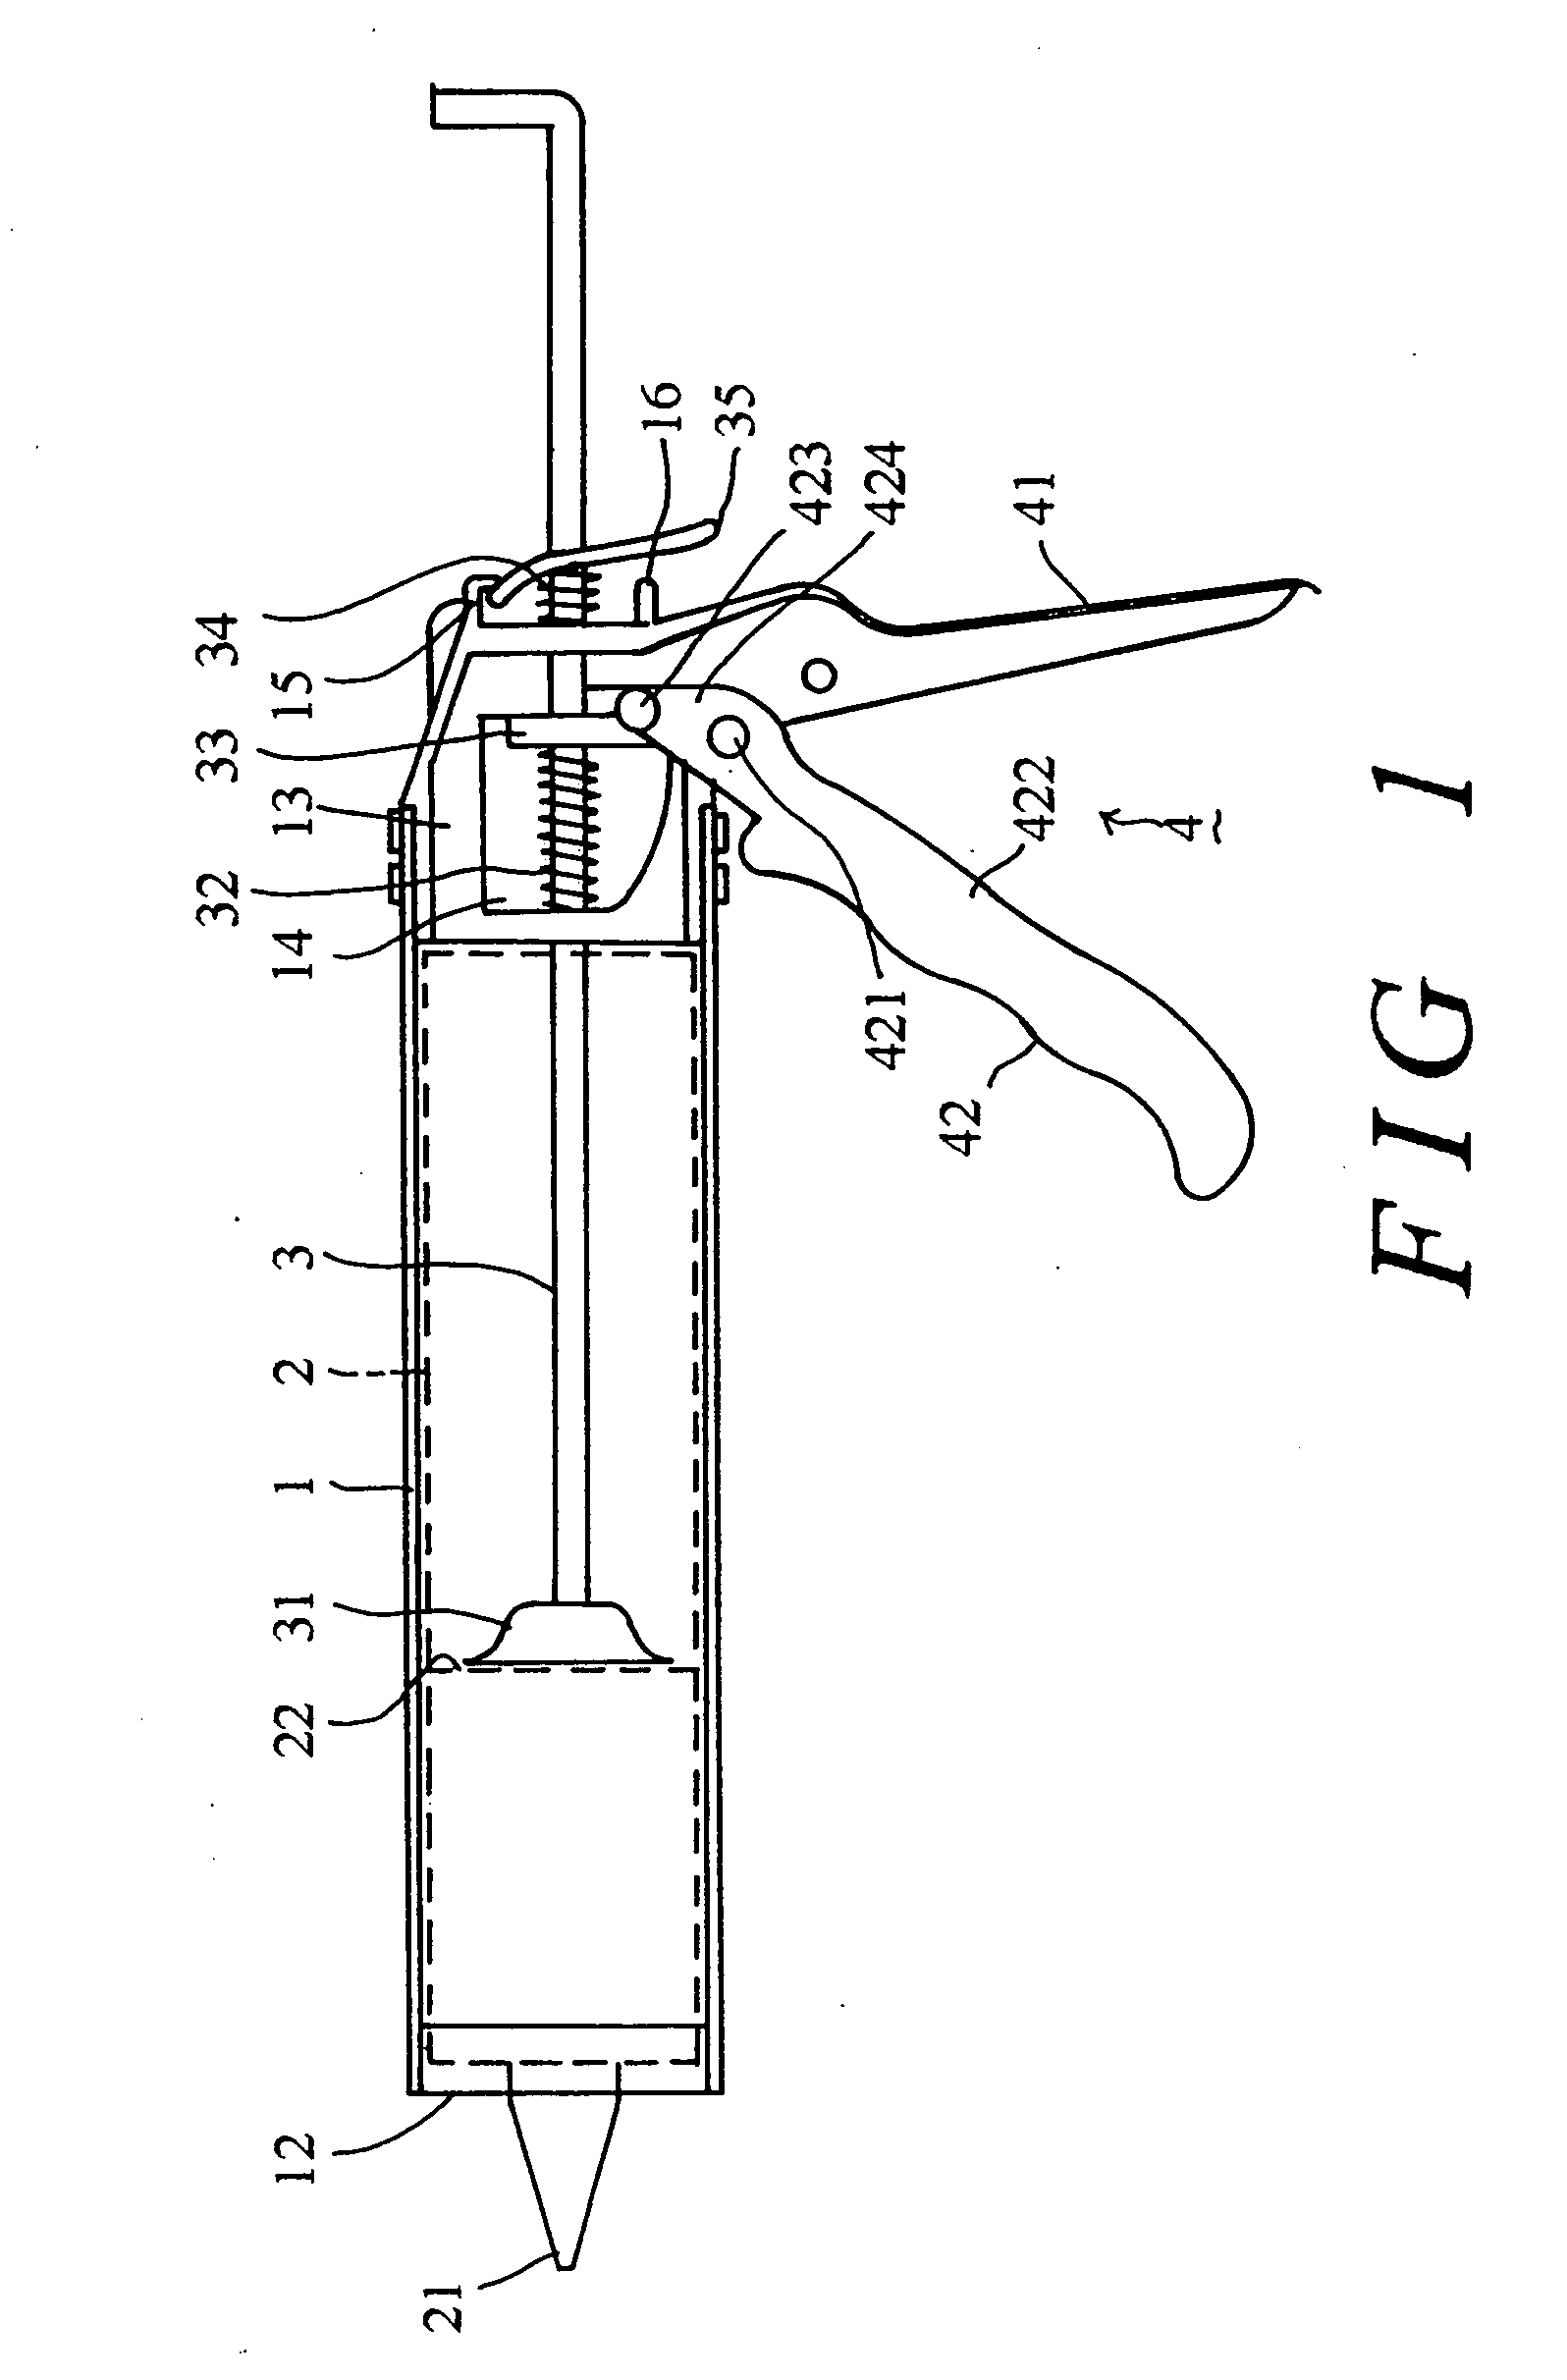 Extruding implement structure